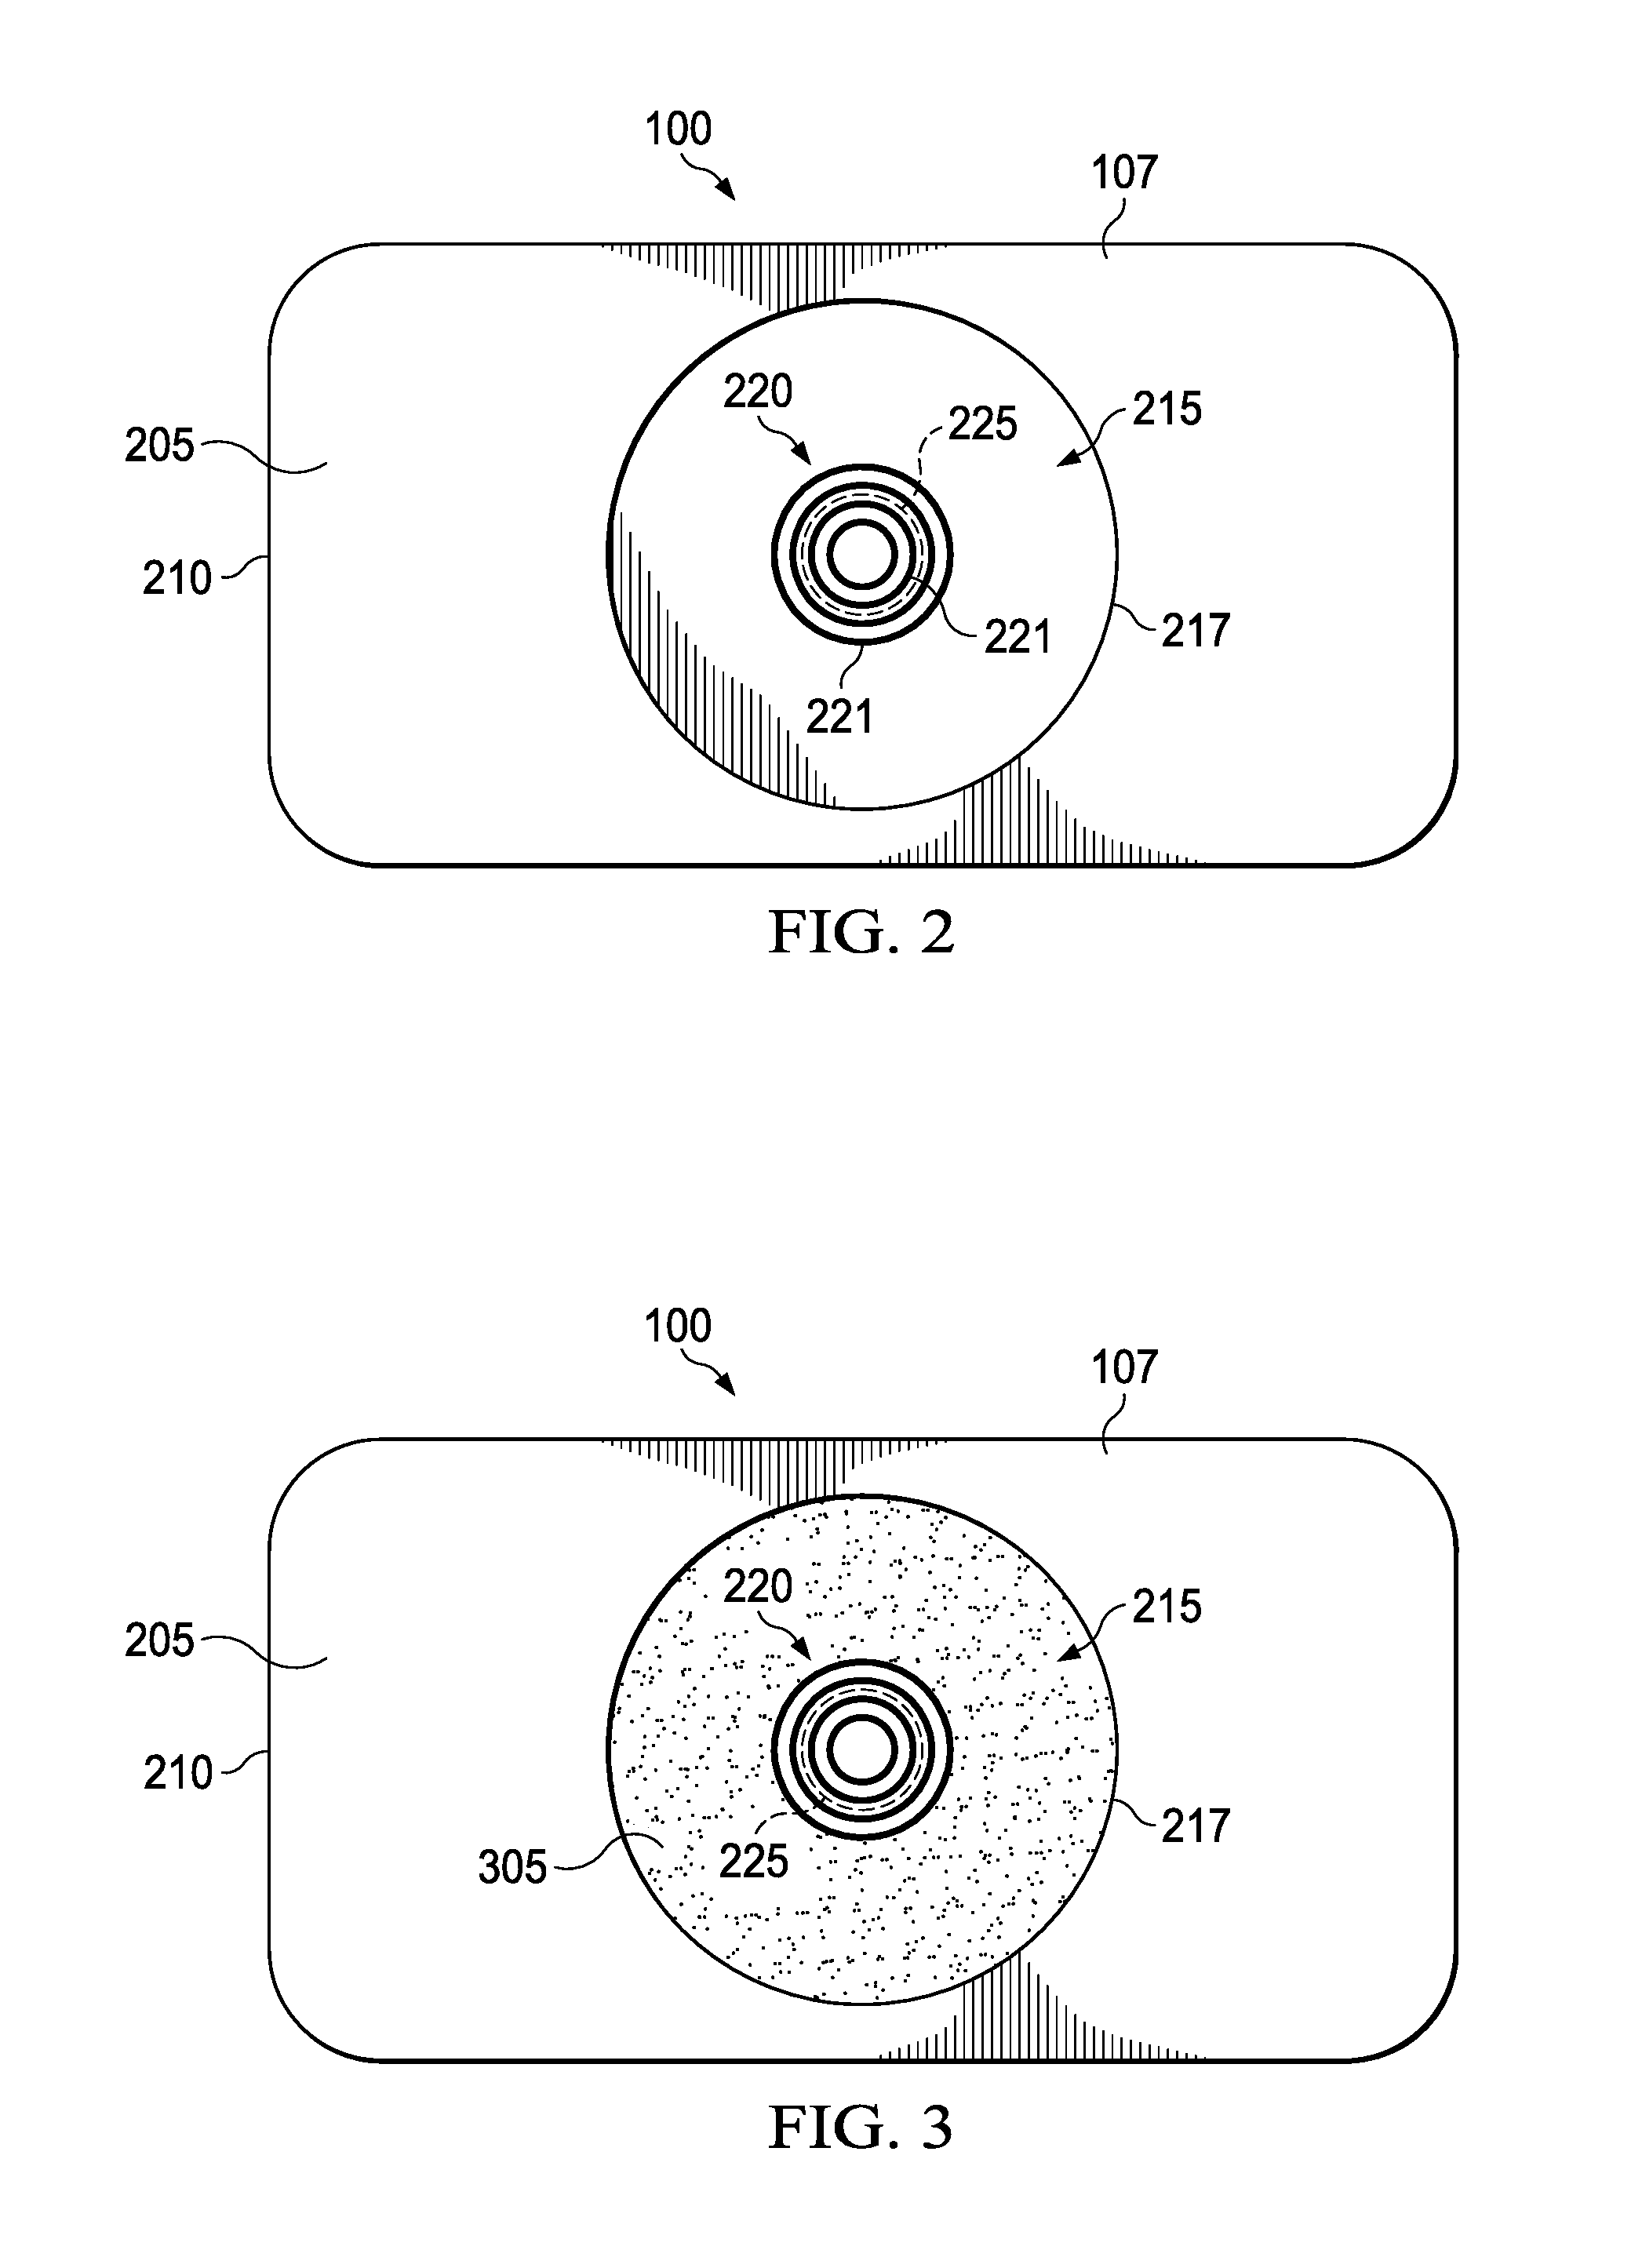 Rotatable Wall-Mounted Thermostat Having a Leveling Feature